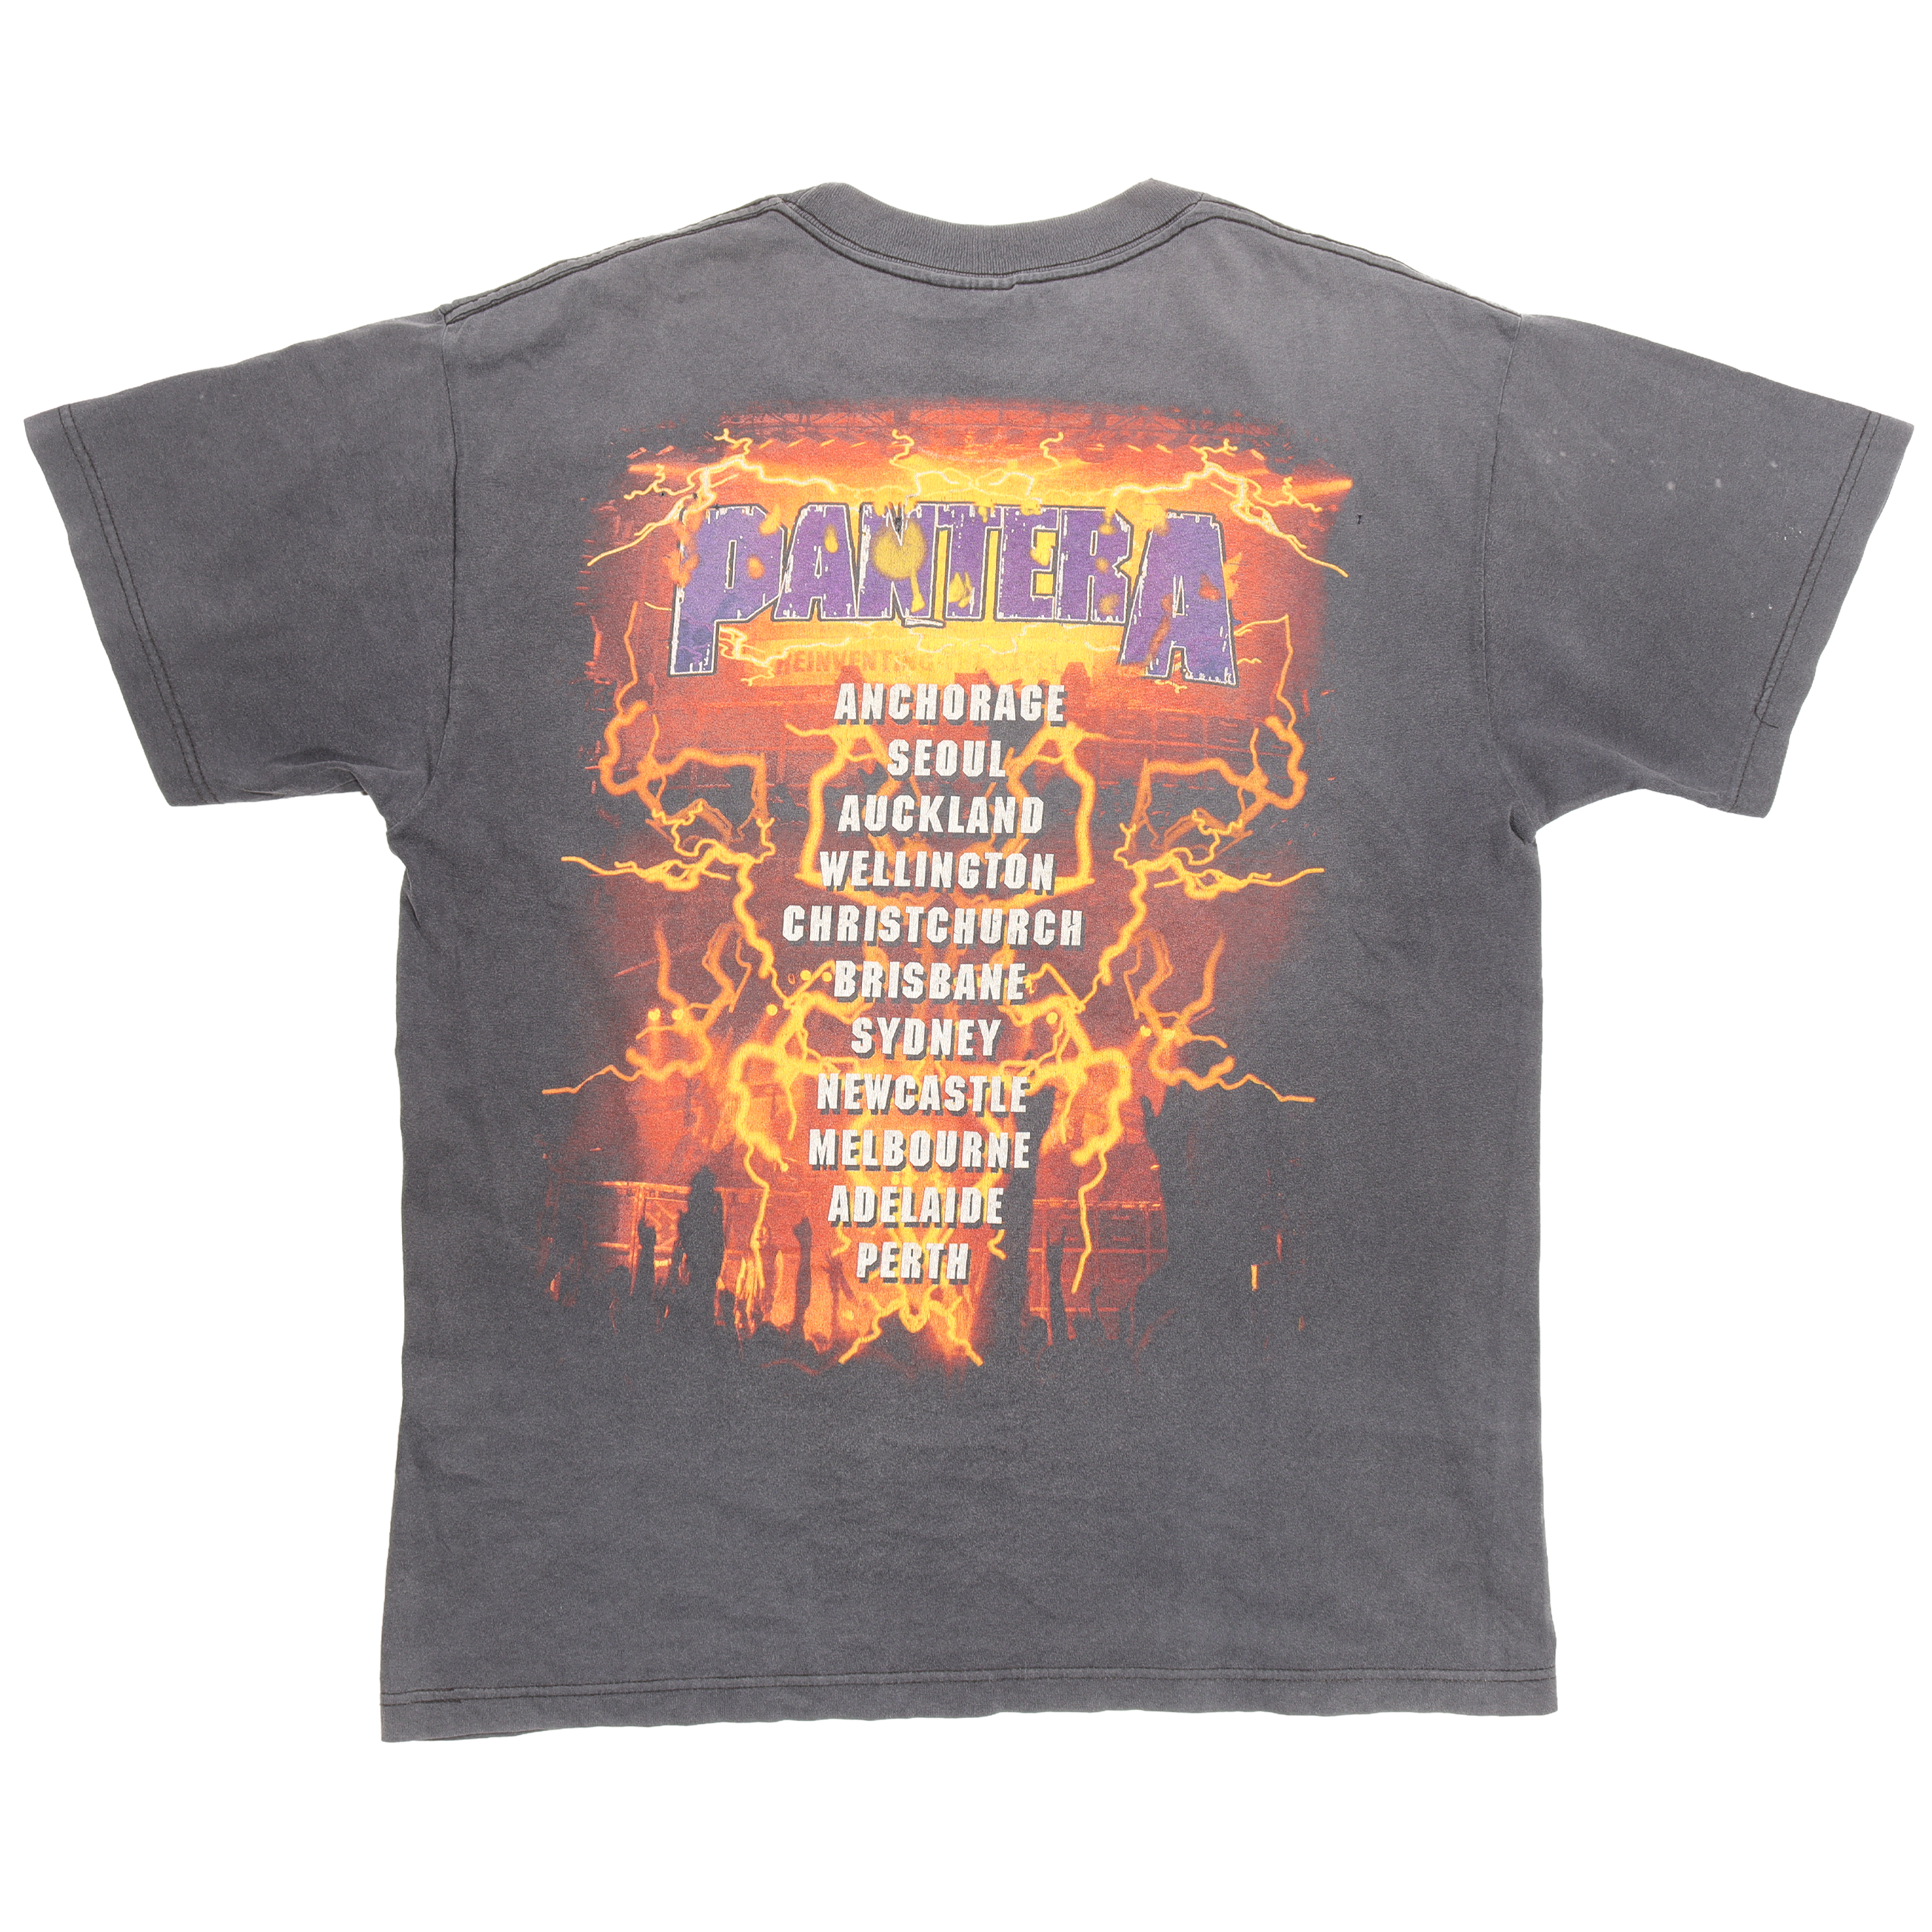 Pantera 'Reinventing The Steel' Tour T-Shirt